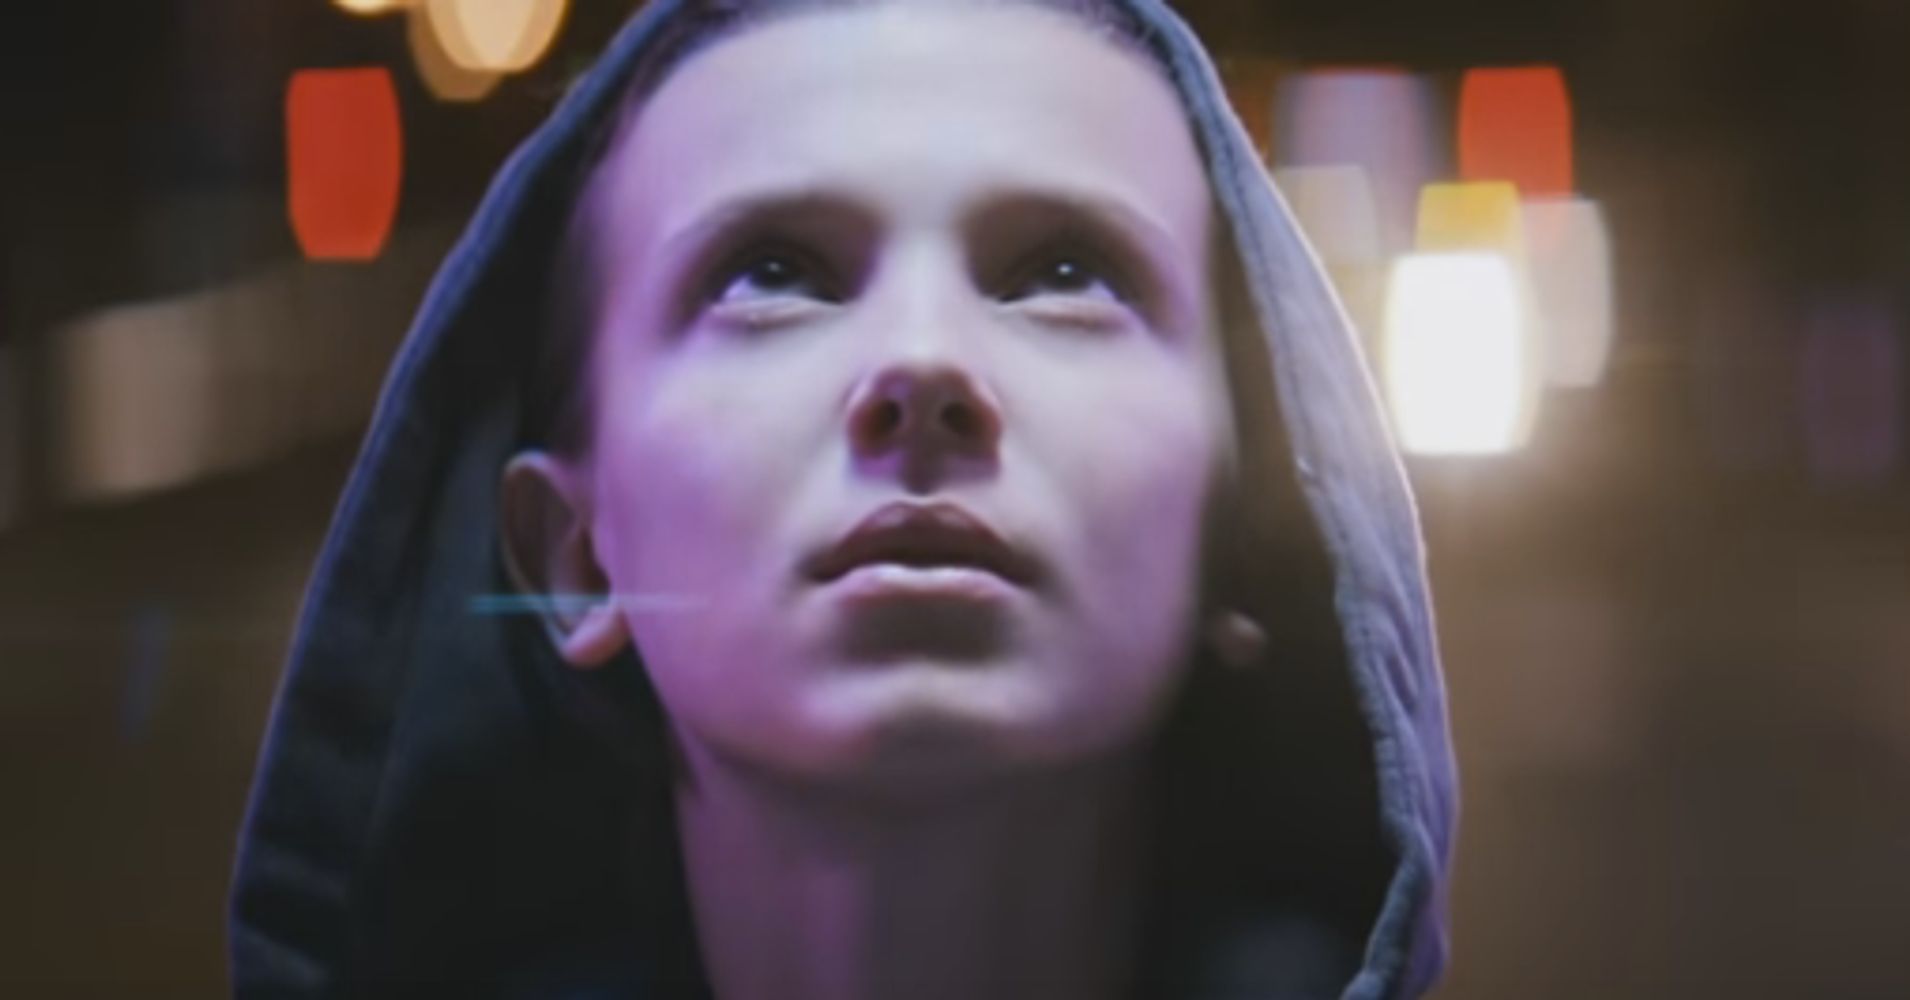 Millie Bobby Brown Cranks Her Lip-Syncing Skills To 11 In New Music Video | HuffPost